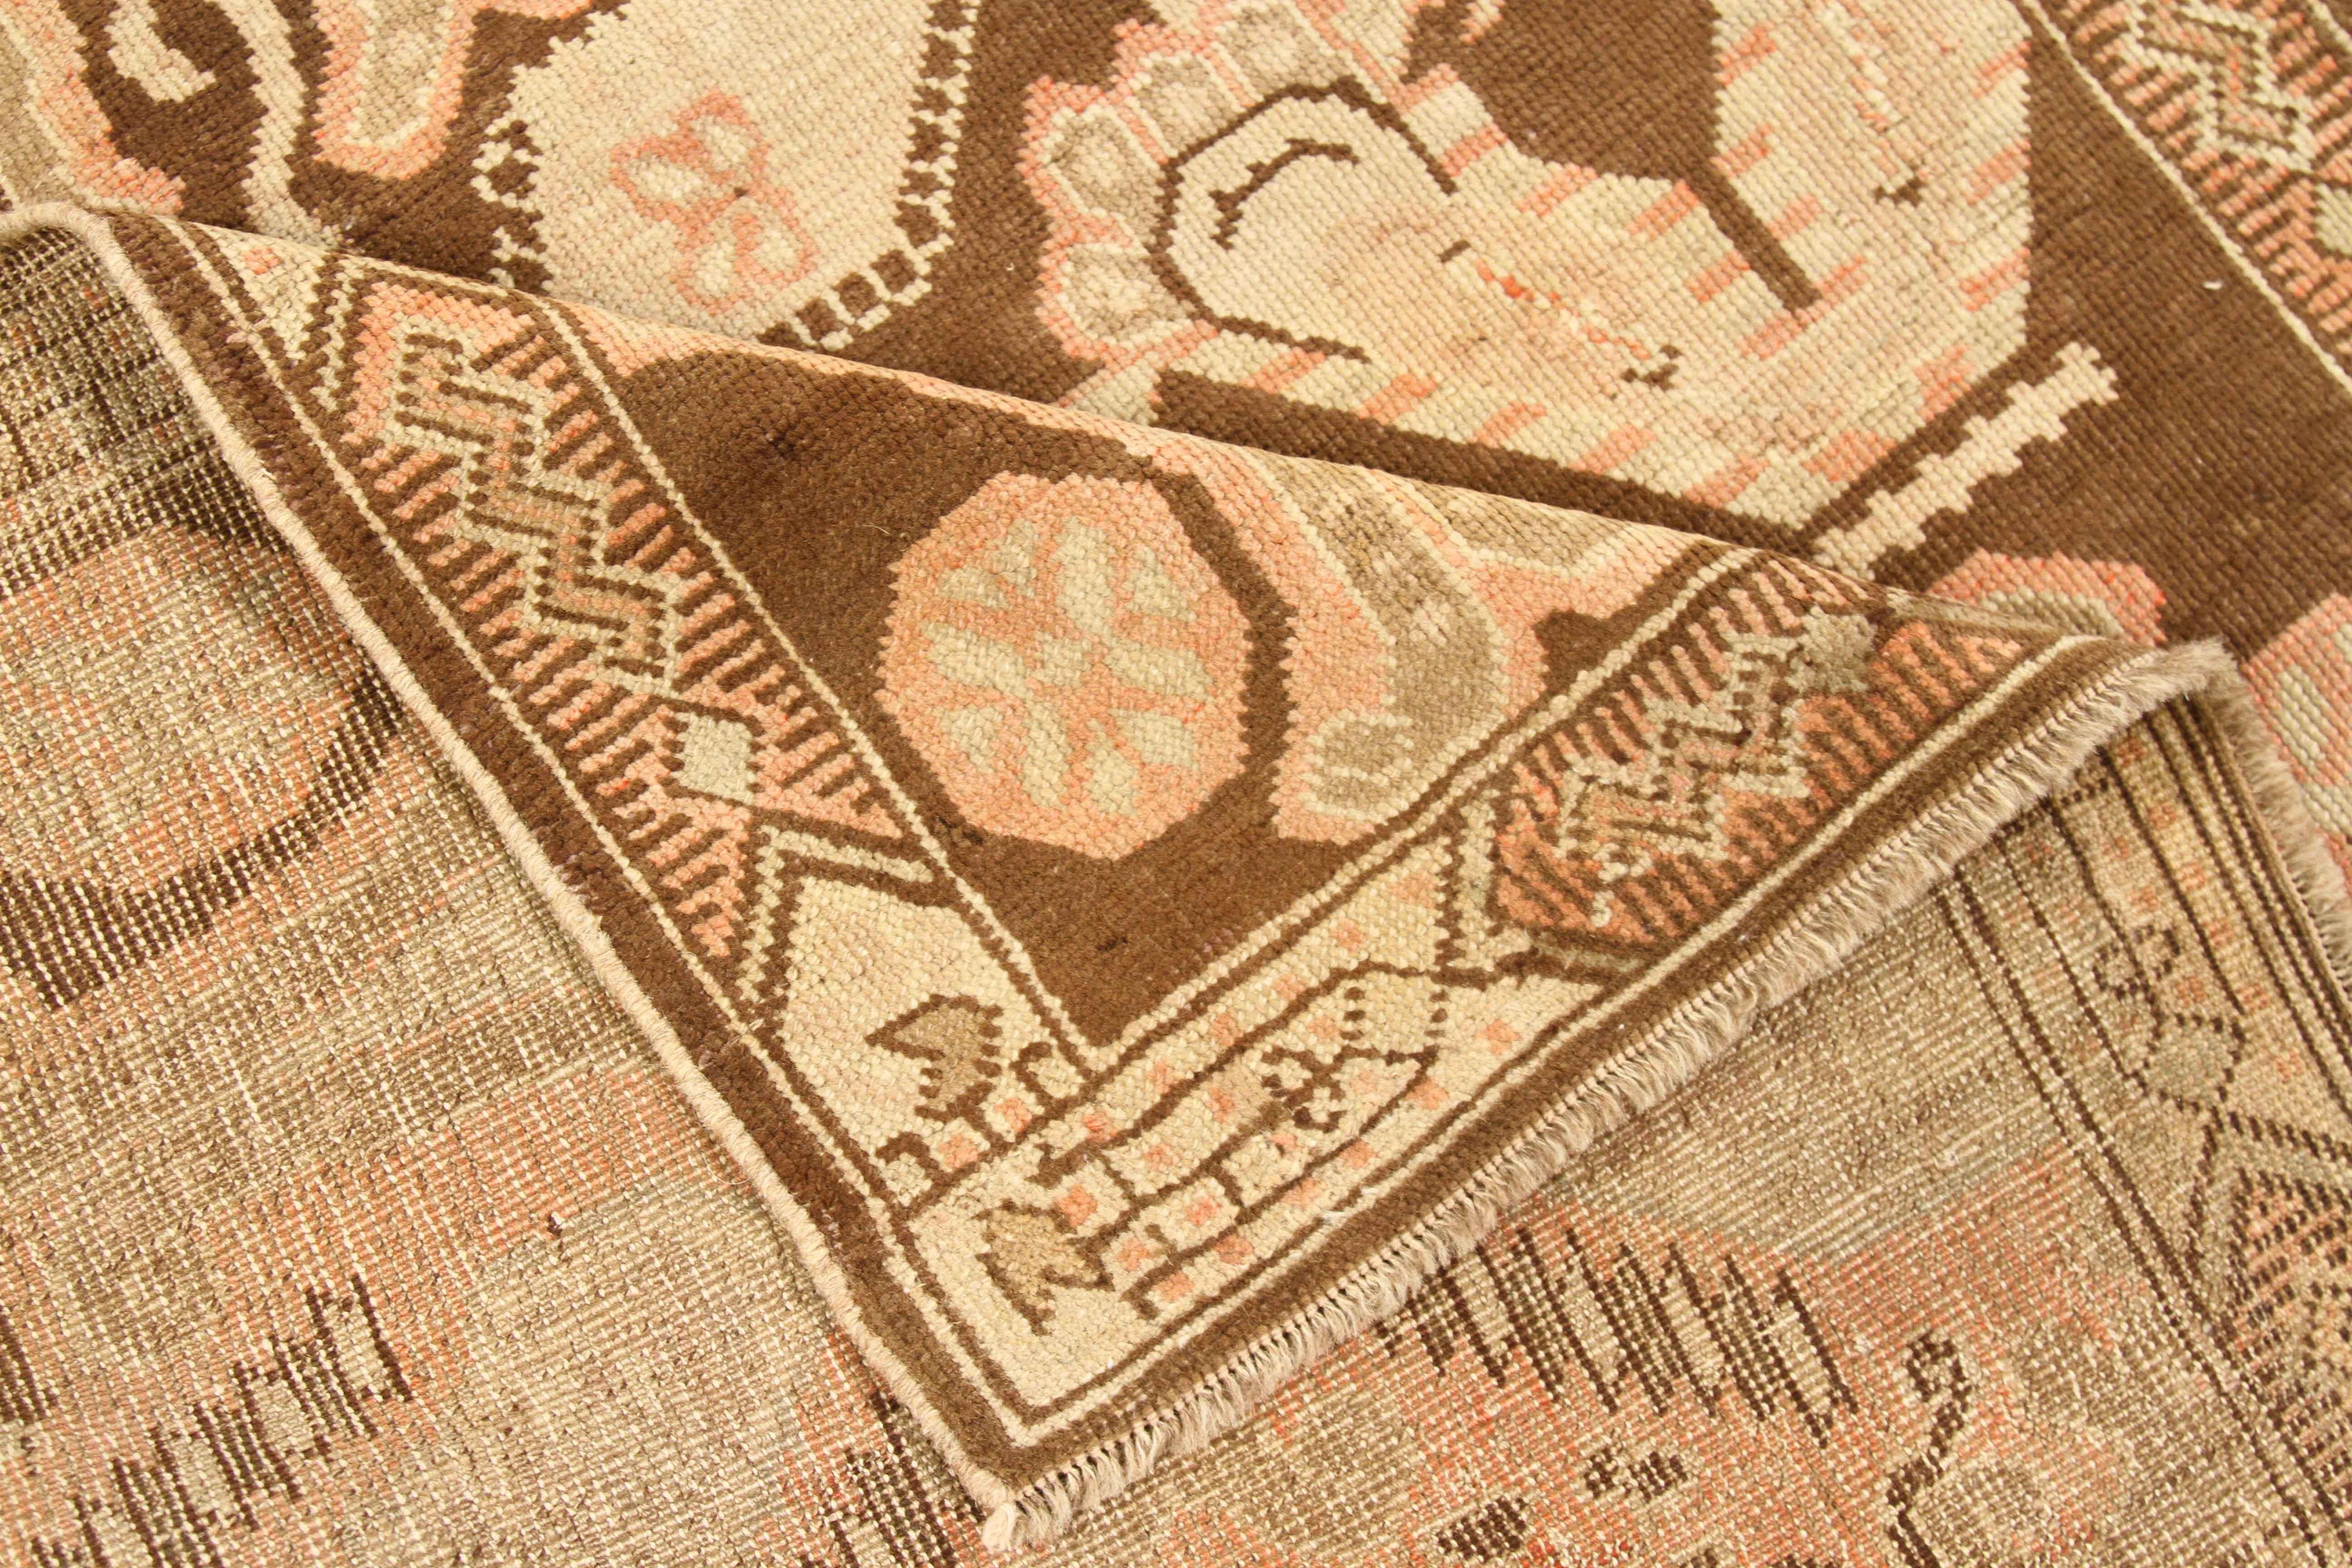 Antique rug made of handspun wool and organic dyes. The weaving and design followed Karabagh patterns that commonly depicted scarabs and ornate medallions. For color, it shows beige, green, brown, and red that gives off a rustic feel to the rug.